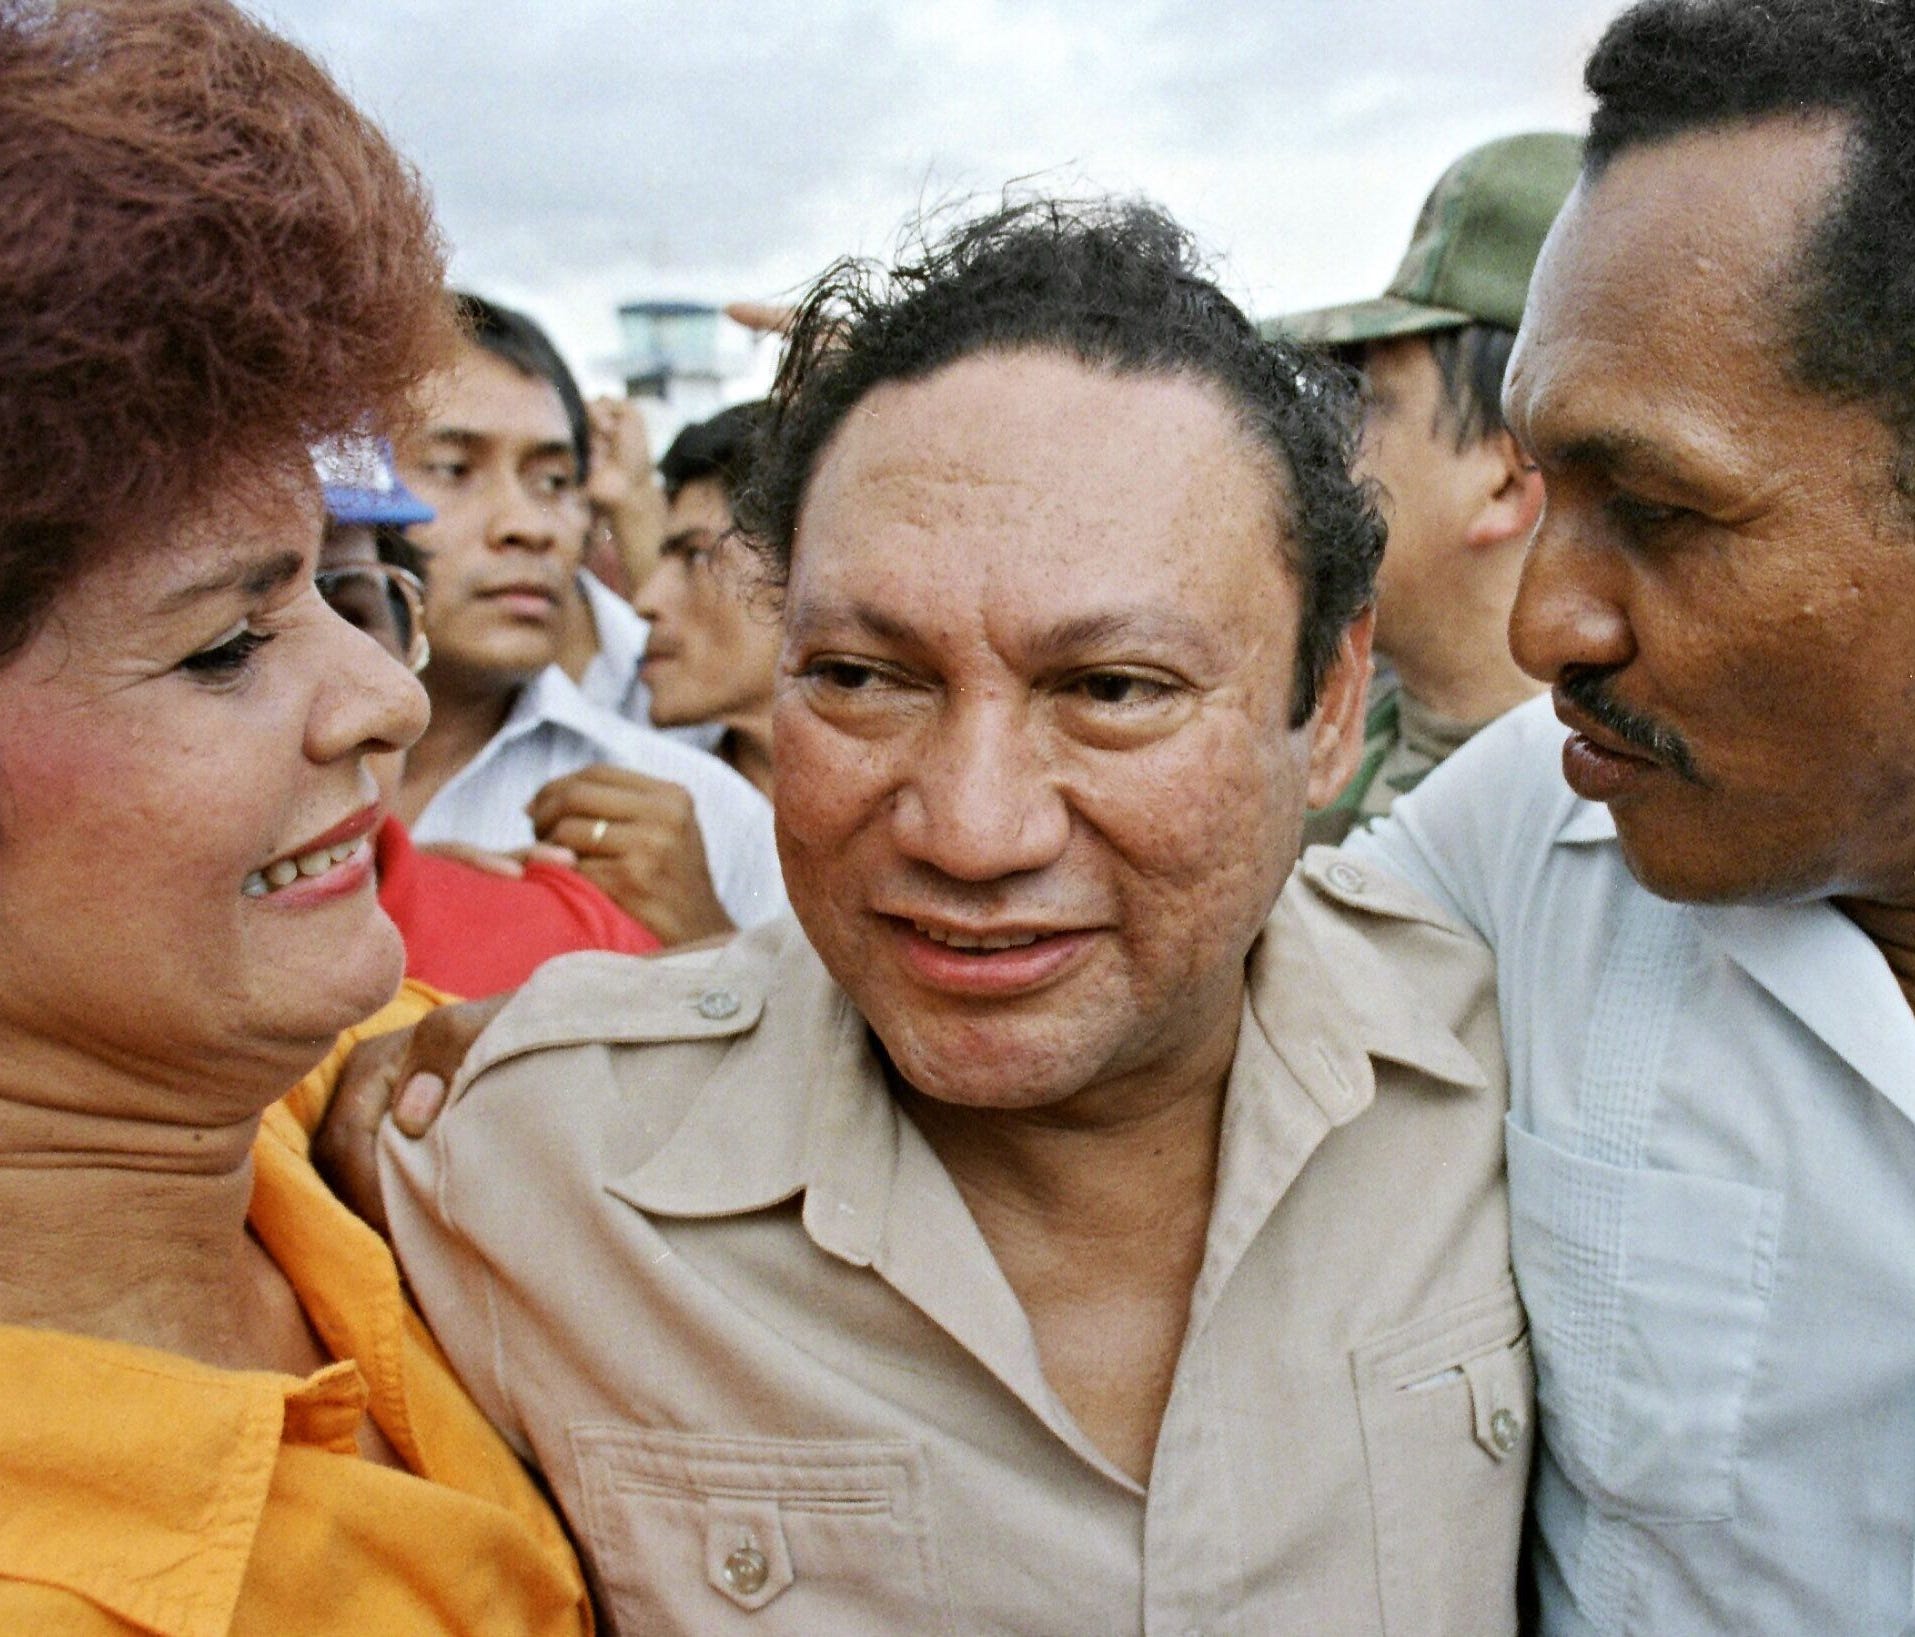 Former Panamian military strong man General Manuel Antonio Noriega is pictured with supporters.